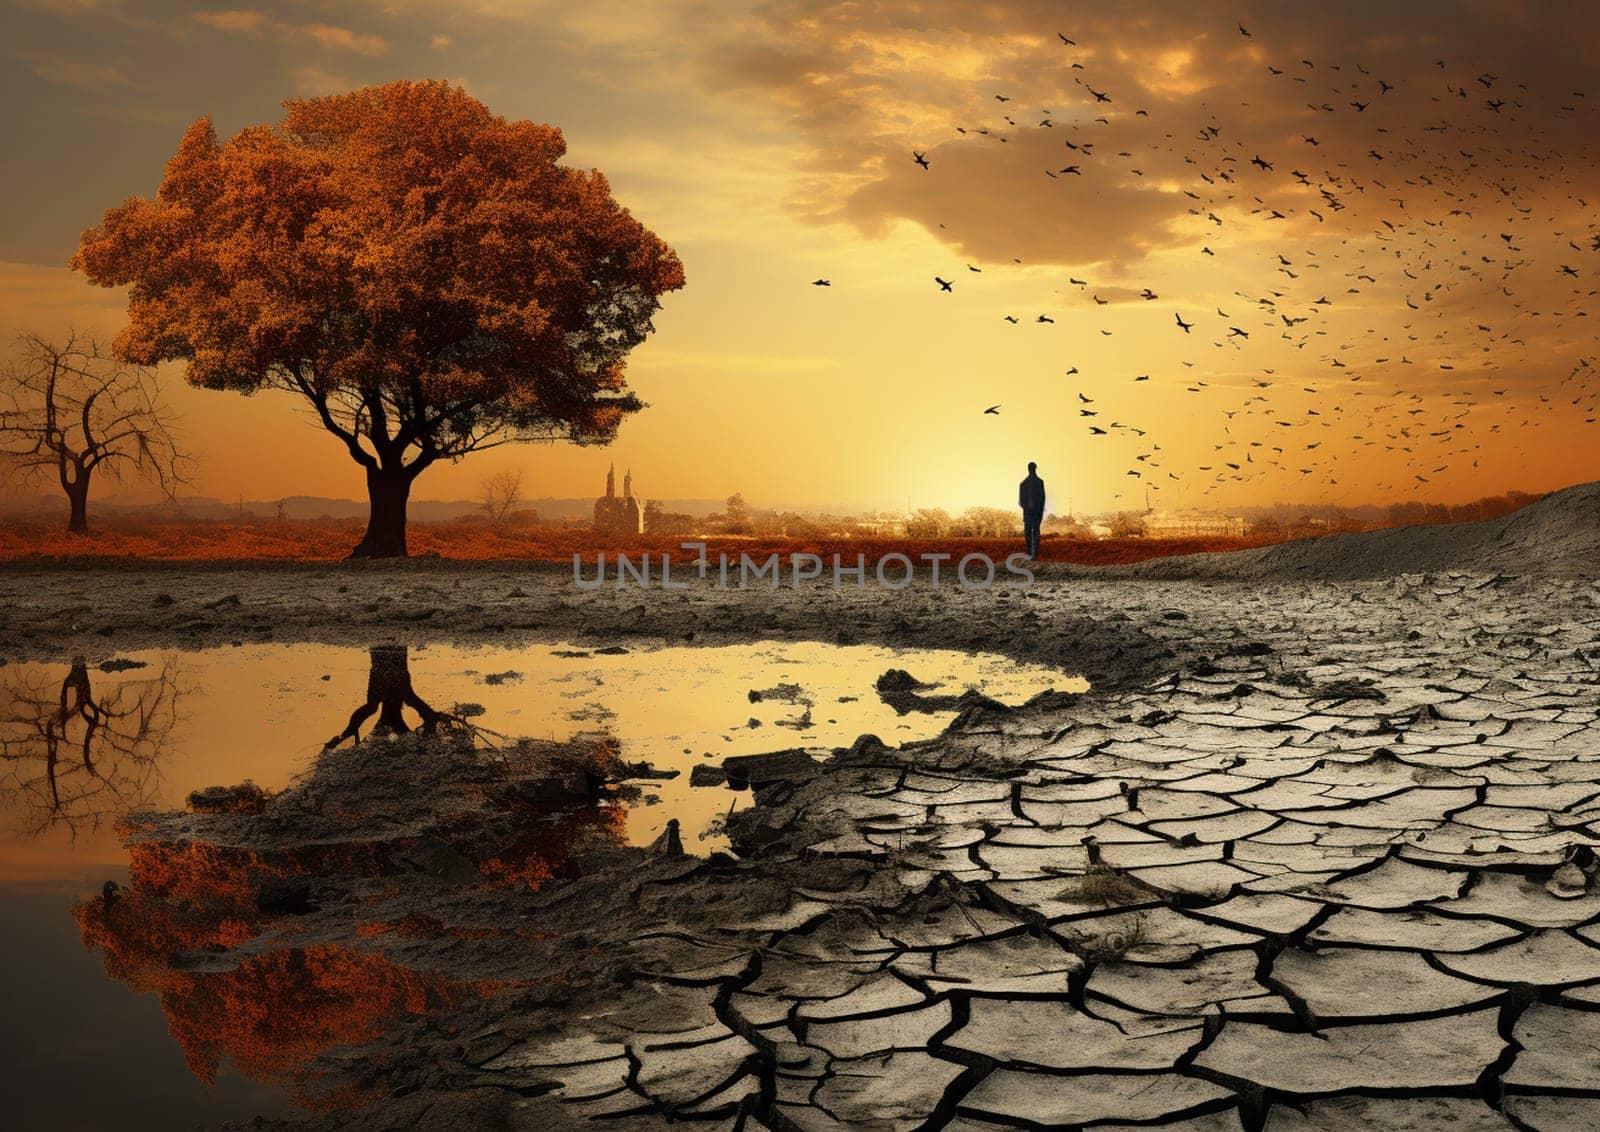 Large lonely tree. Autumn, yellow leaves. Digital art. High quality photo